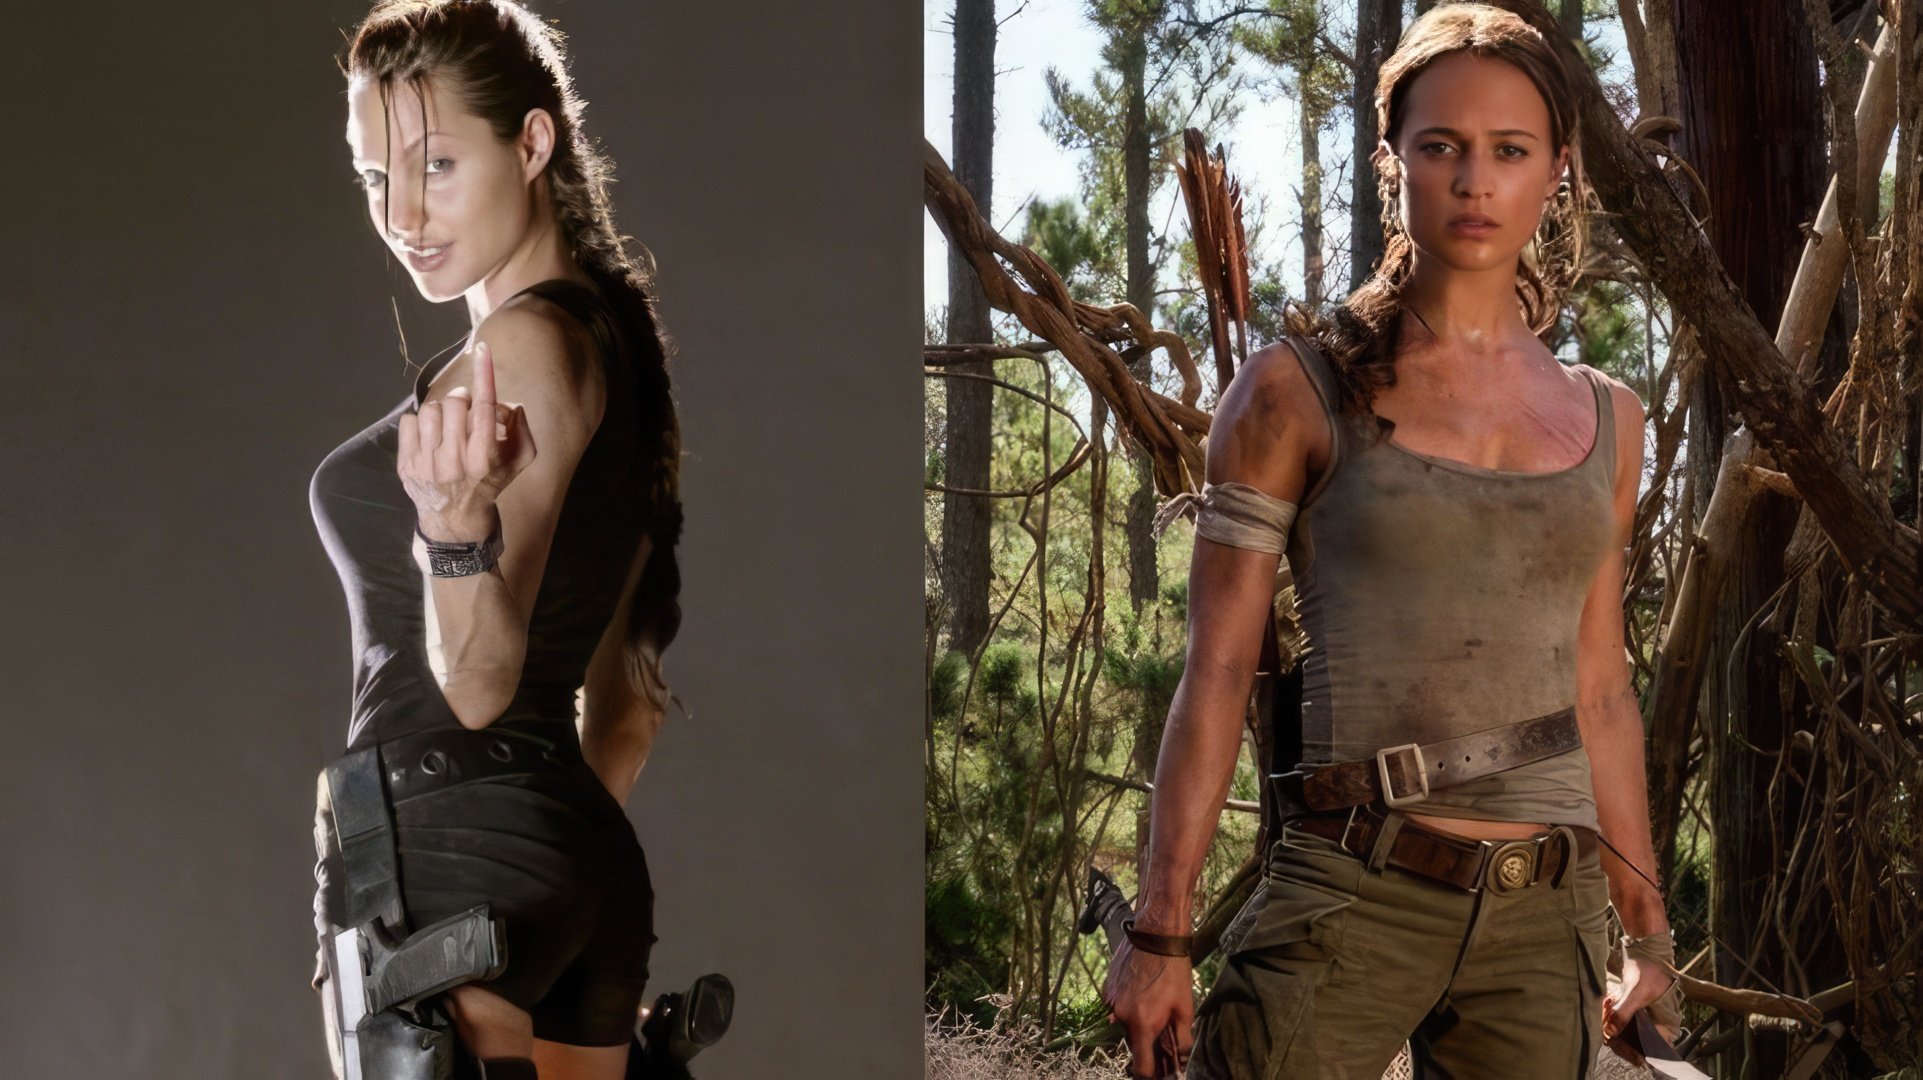 In the third film, Lara Croft was played by Alicia Vikander